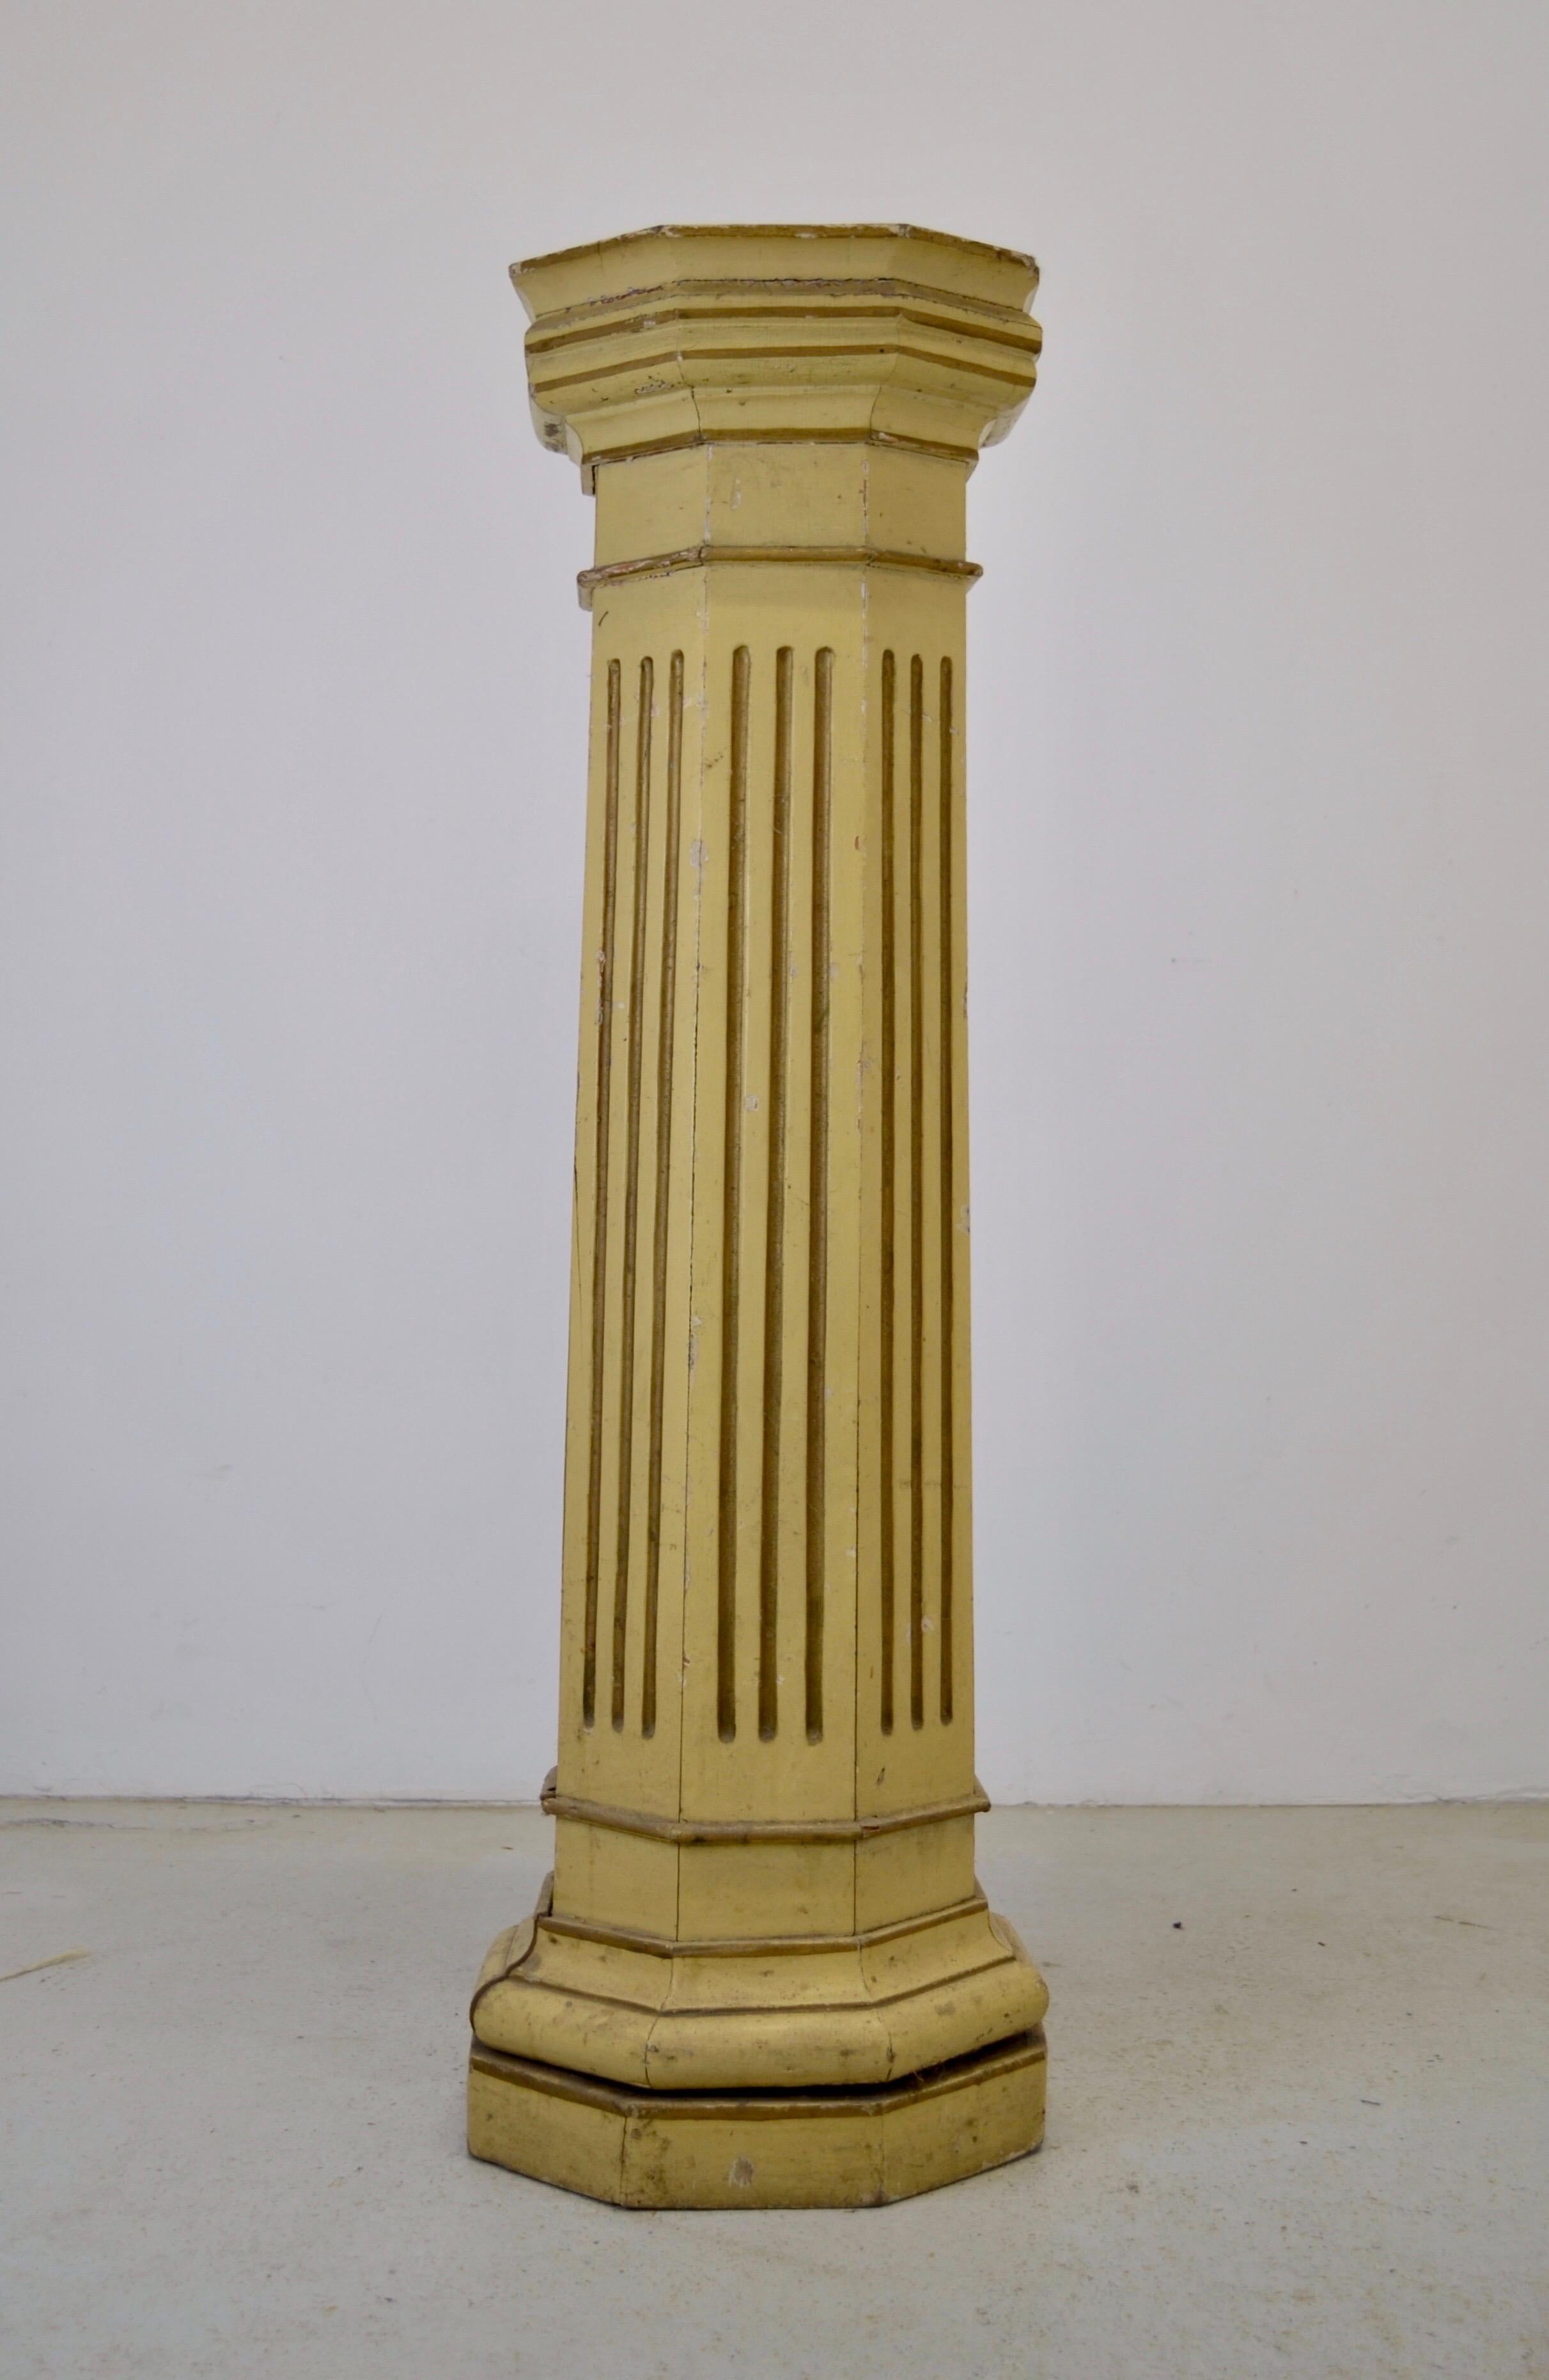  A french church pedestal from the 19th or early 20th century, made of solid pine, with an original cream-colored patina adorned with gilding. Despite some minor losses, it remains very stable and retains a superb patina.